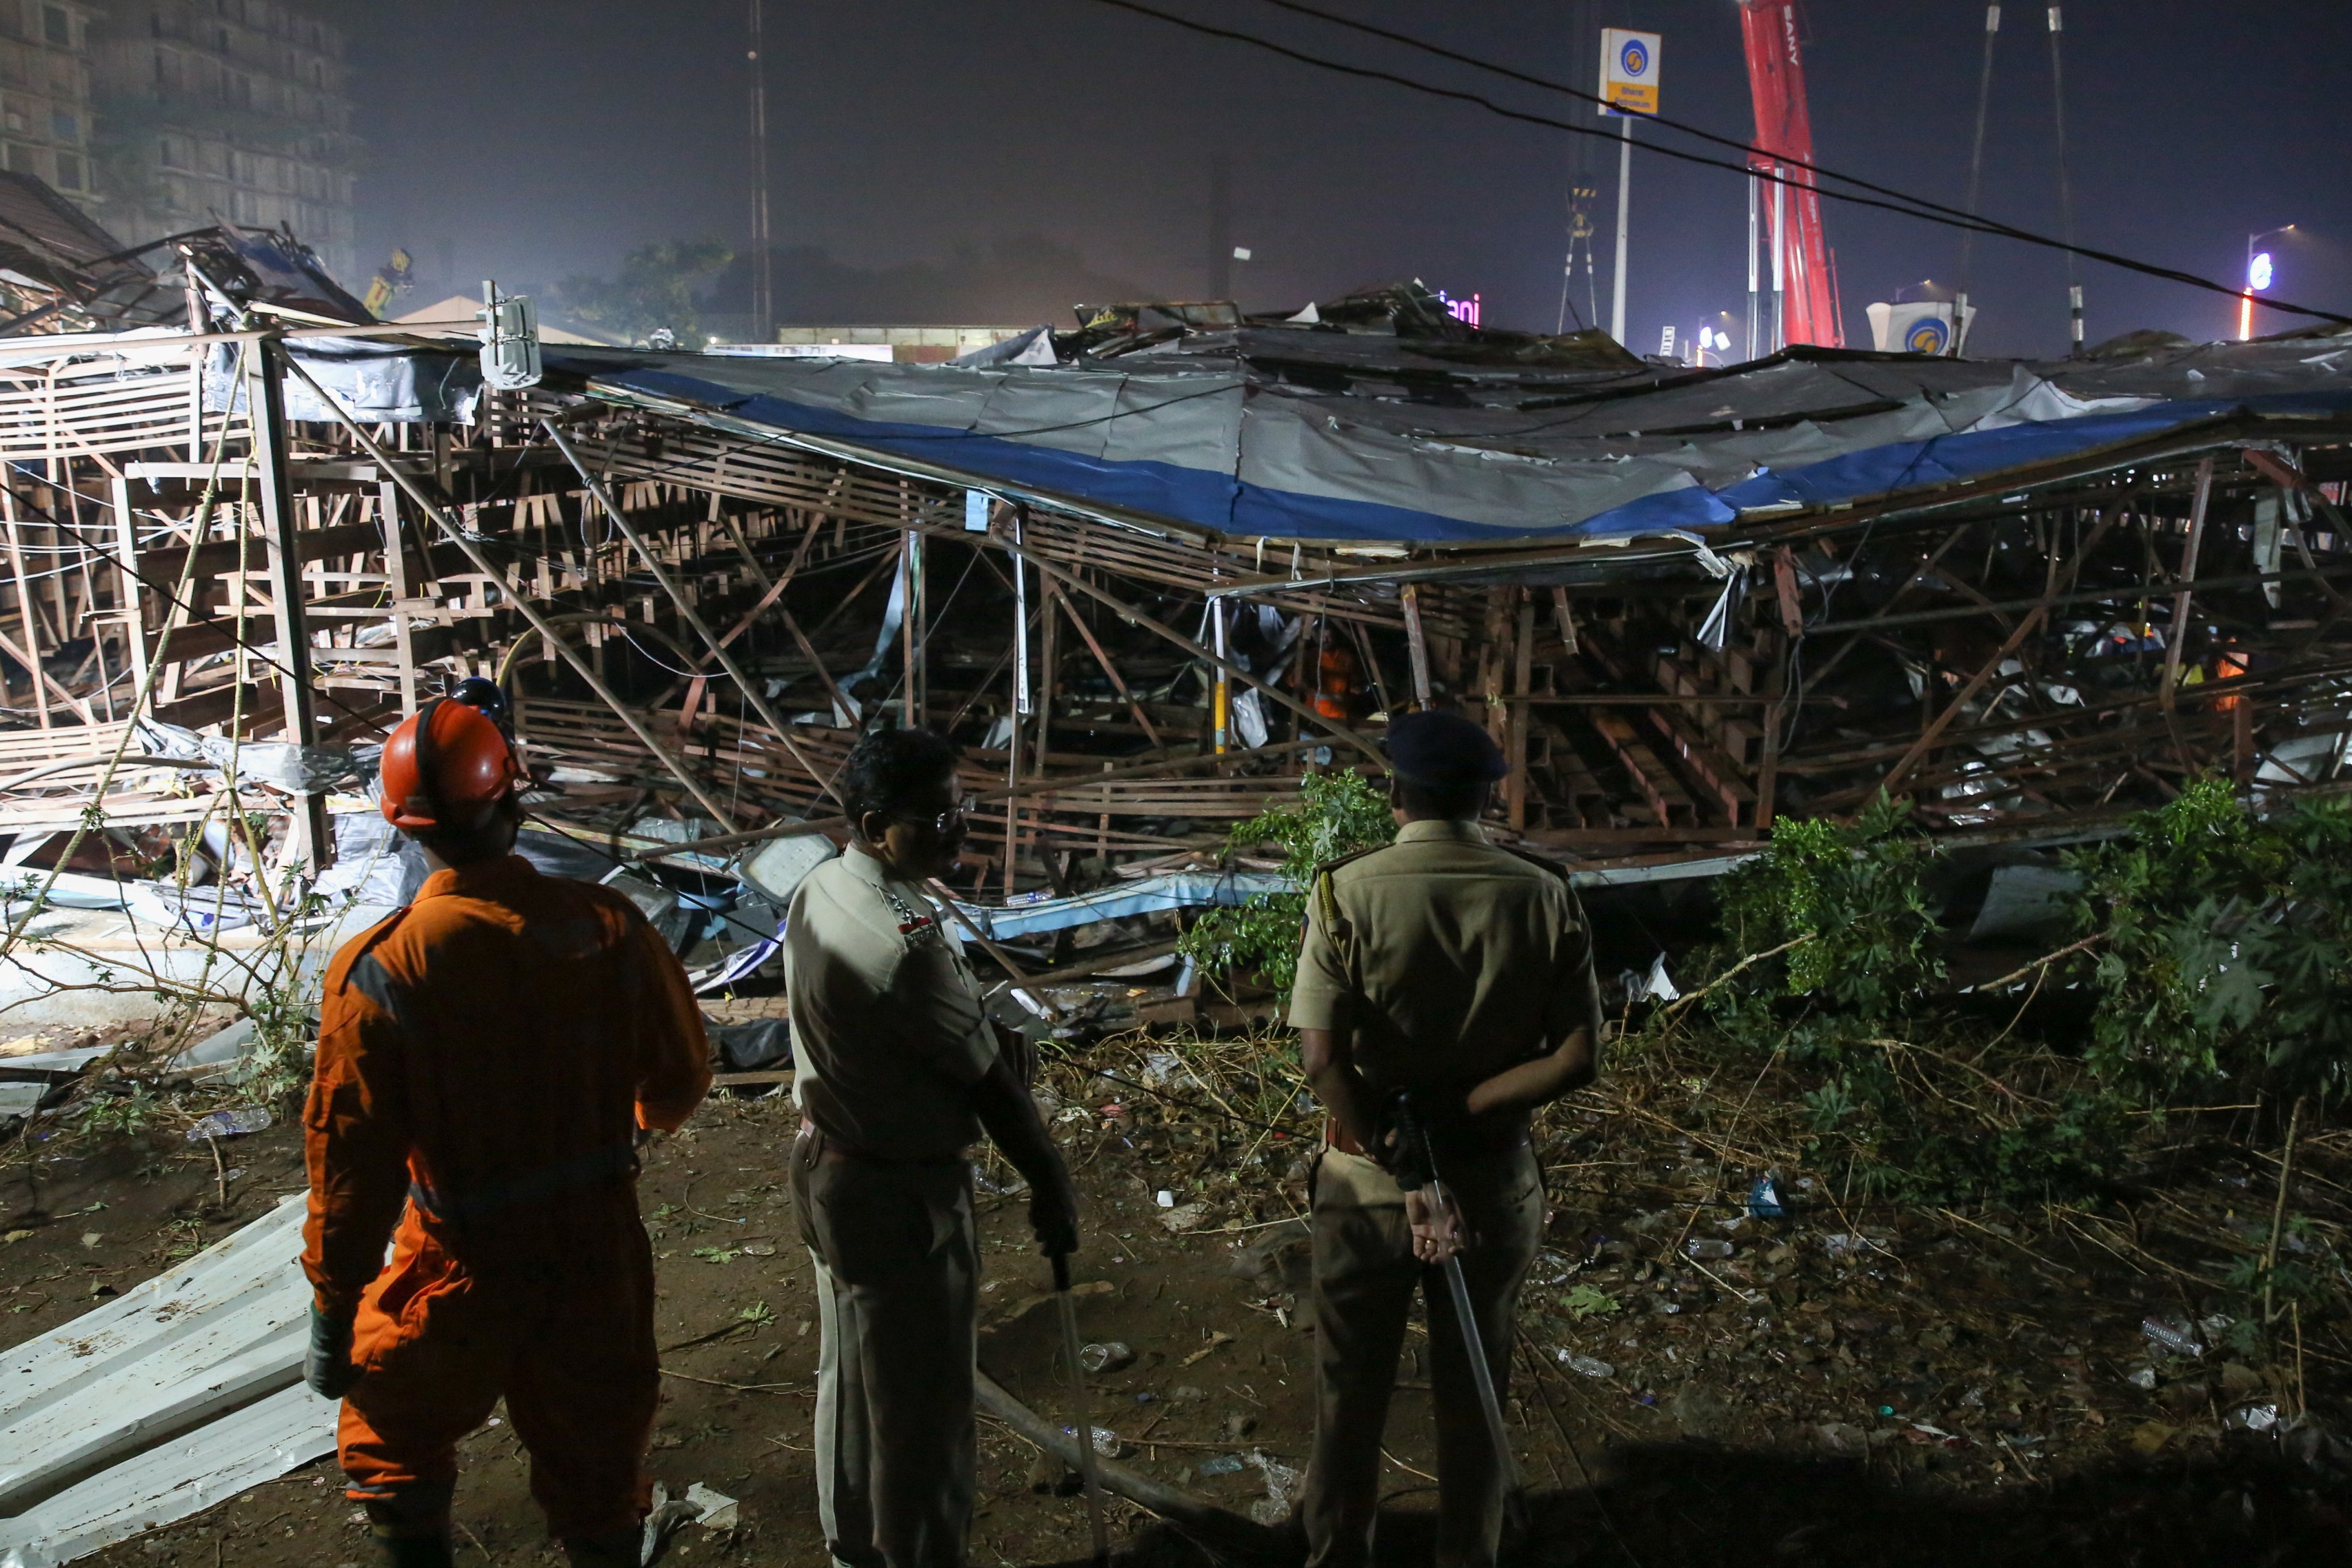 A member of the National Disaster Response Force (NDRF) and Indian policemen inspect the damages at a petrol station after a giant billboard fell on it in Mumbai, India on Monday. Photo: EPA-EFE